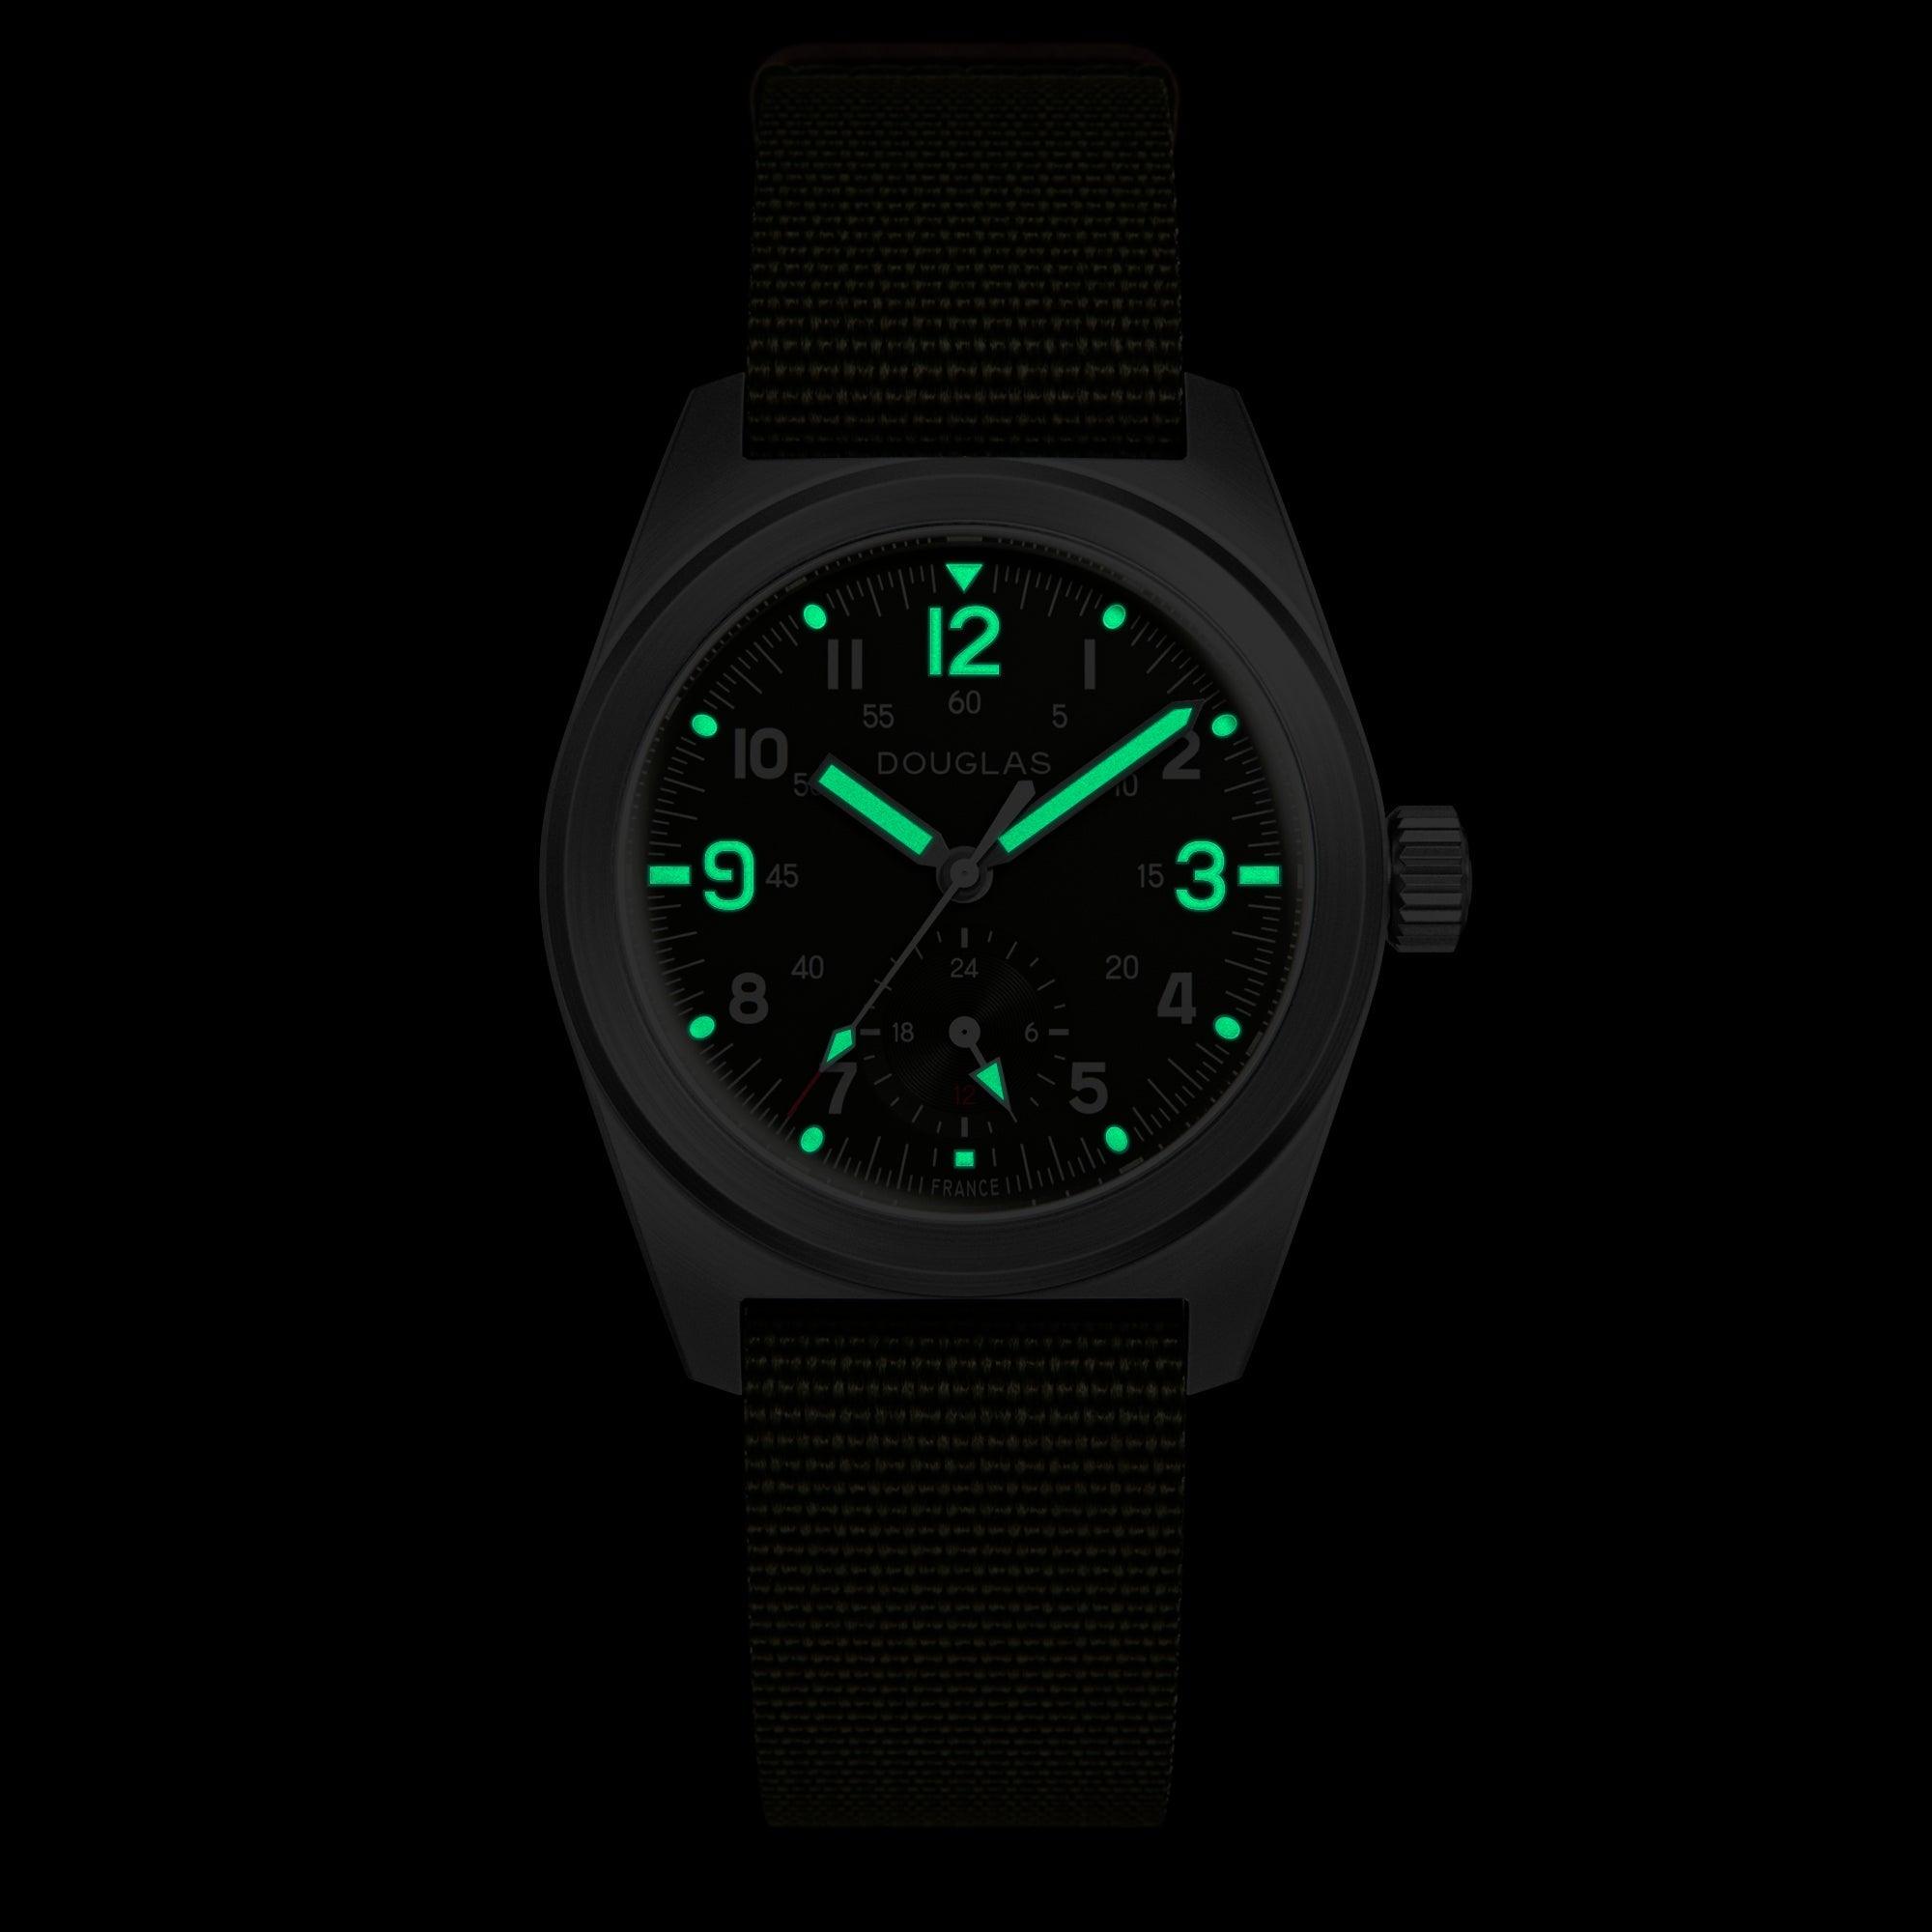 Outrider Professional Mecaquartz 38 Field Watch – French Army Green - Limited Edition - Wolbrook Watches